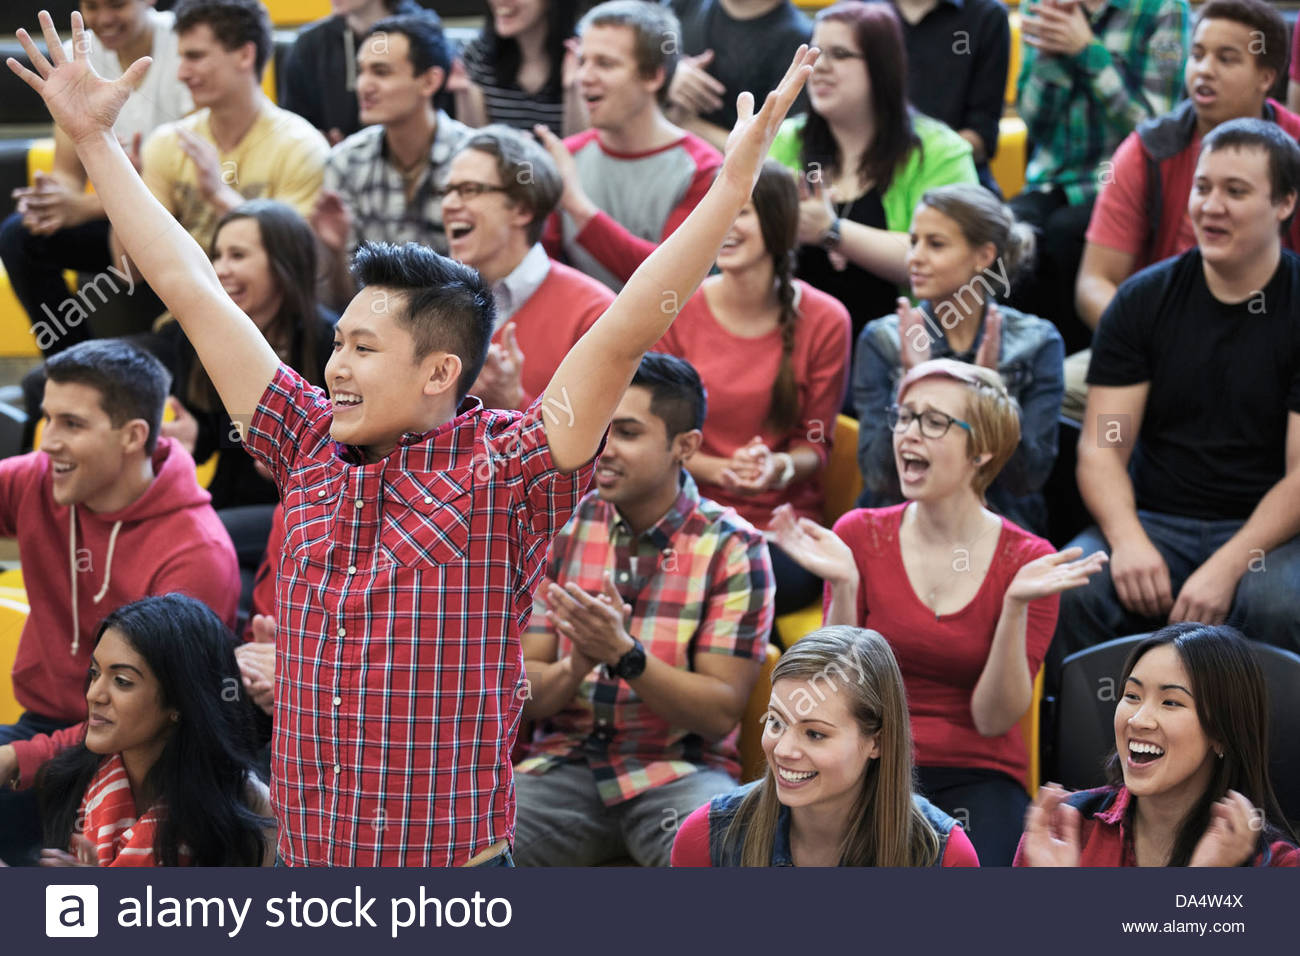 Male student cheering at college sporting event Stock Photo